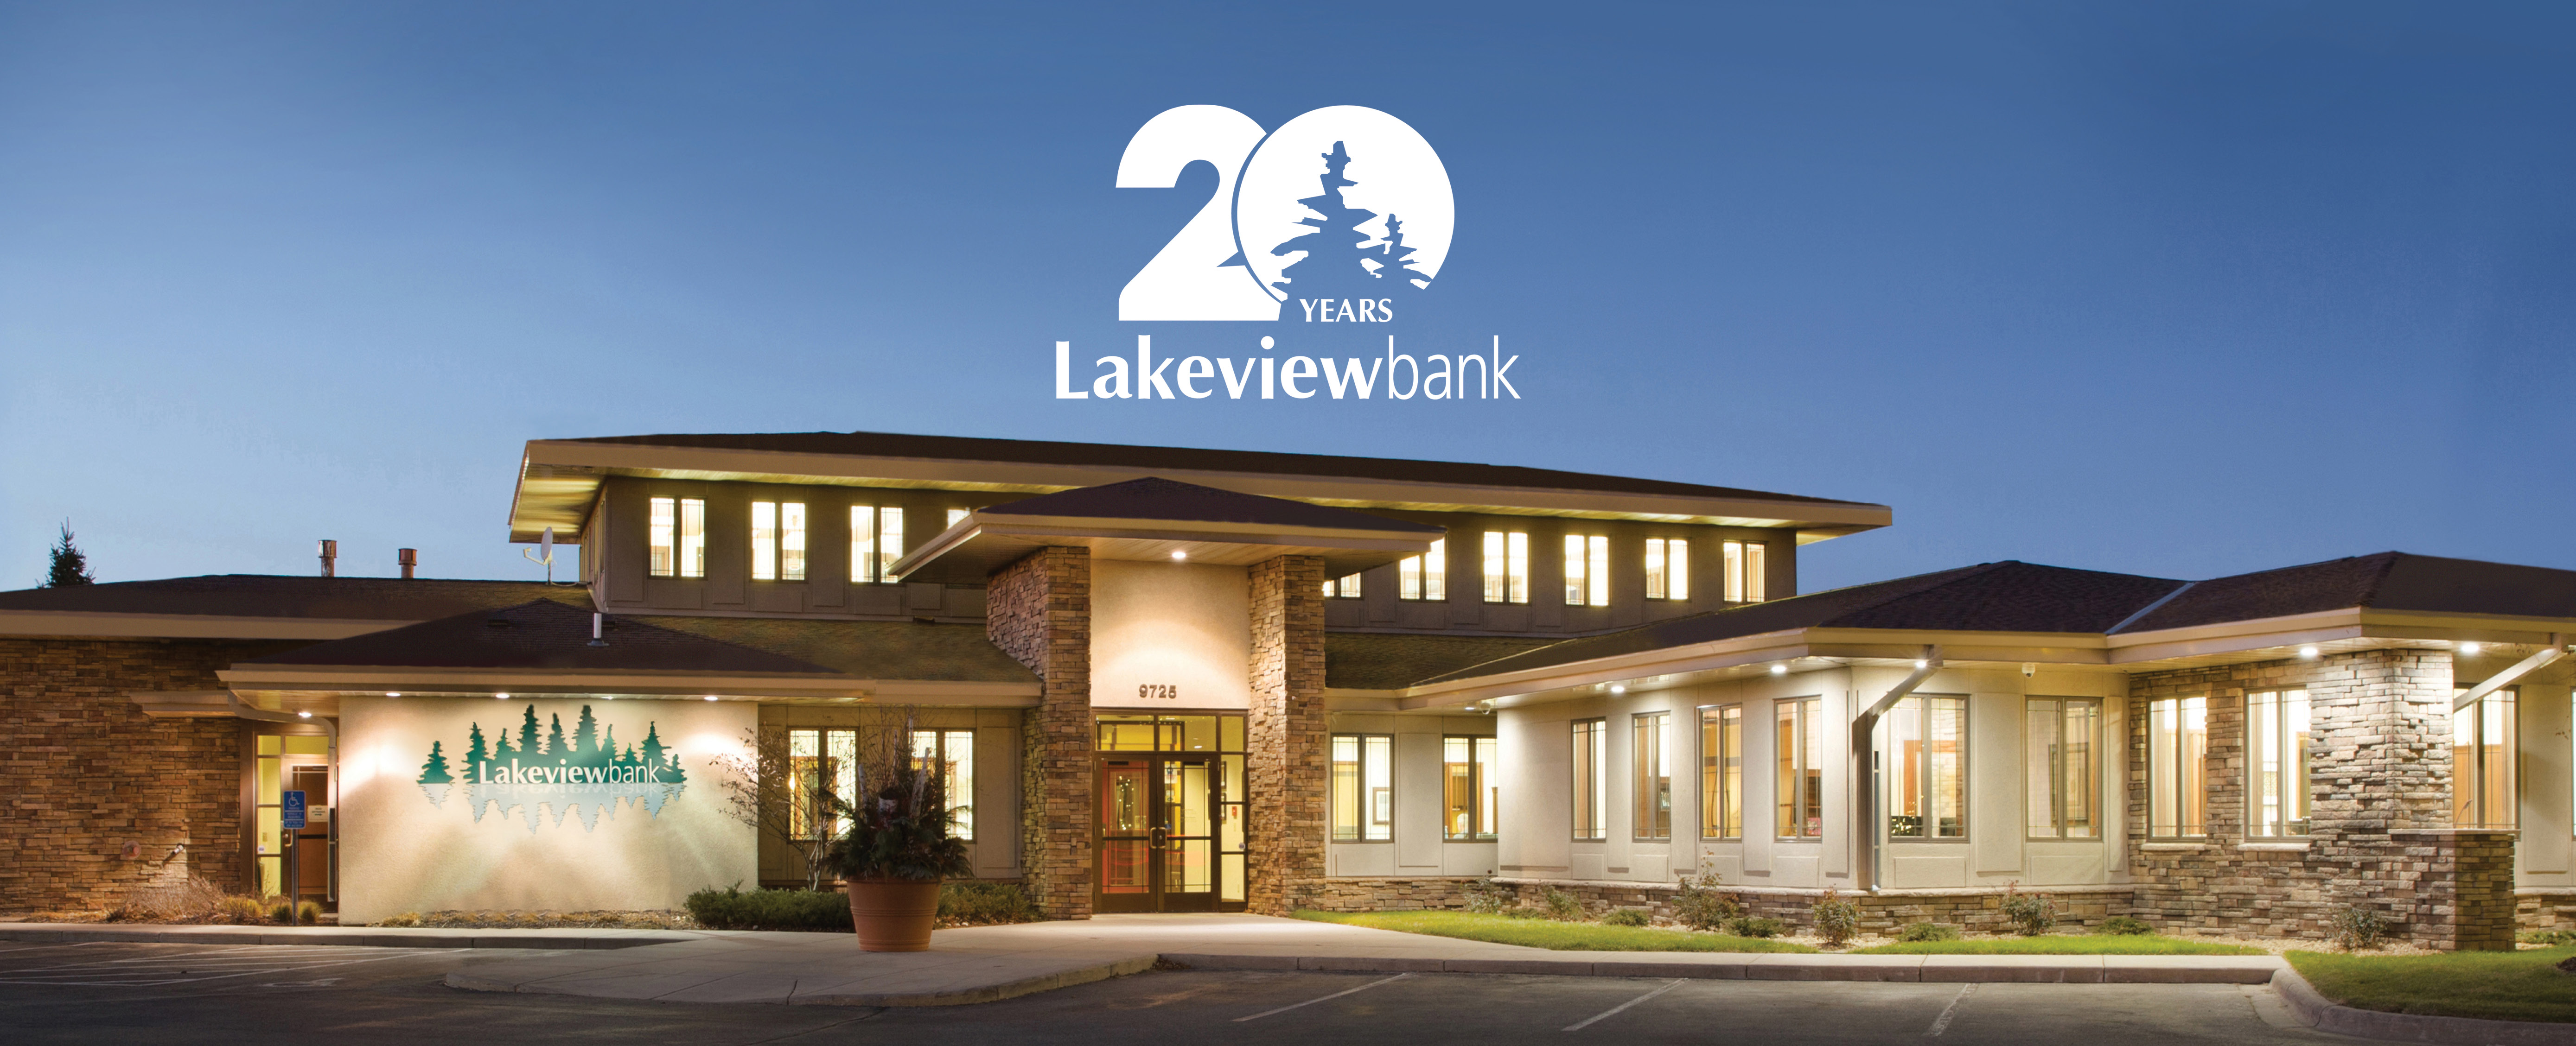 Image of Lakeview Bank with image of 20 year logo above it.